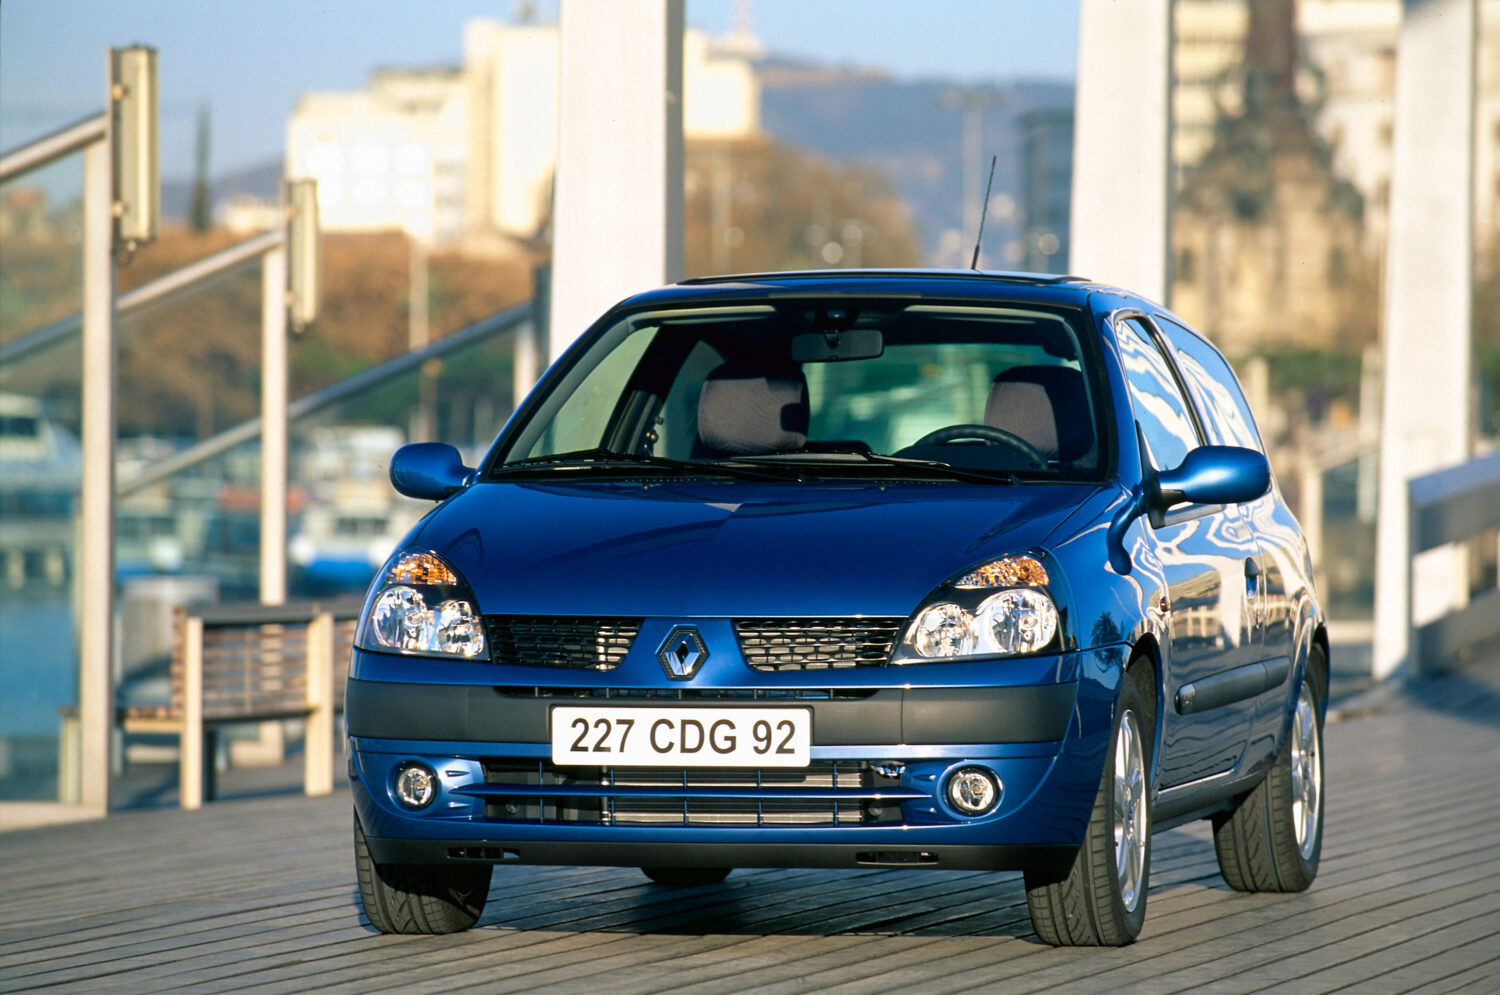 2020 - 30 years of Renault CLIO - Renault CLIO 2 (1998-2005)